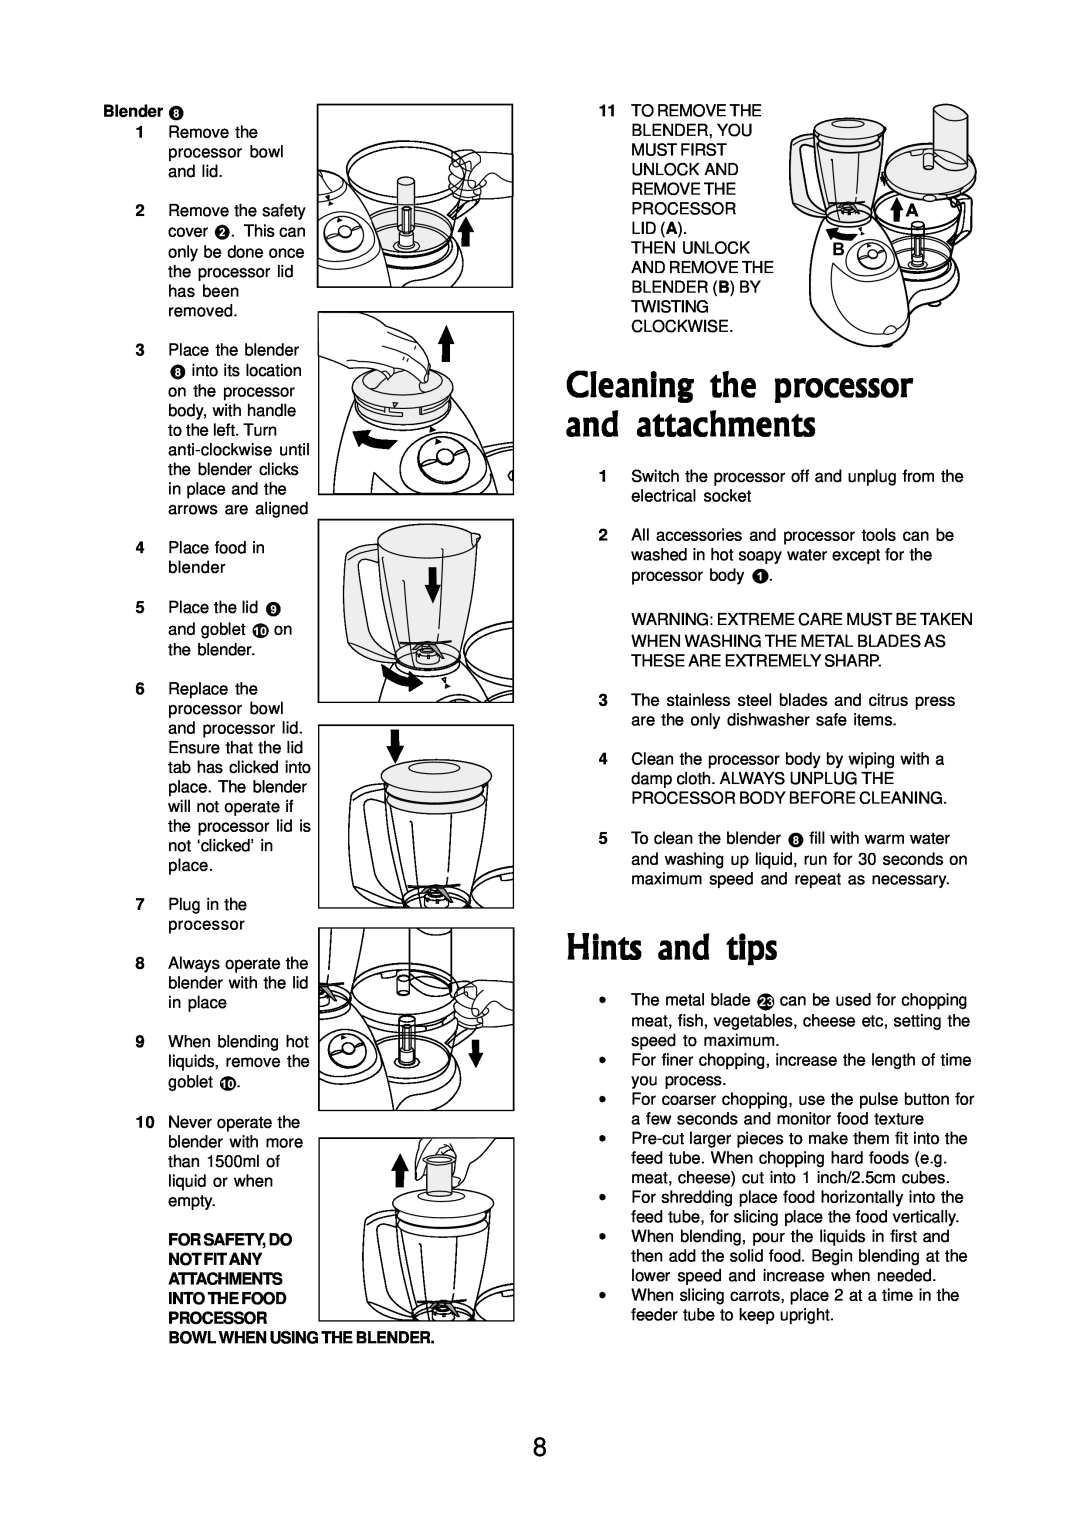 Morphy Richards 730 manual Hints and tips, Cleaning the processor and attachments, Bowl When Using The Blender 